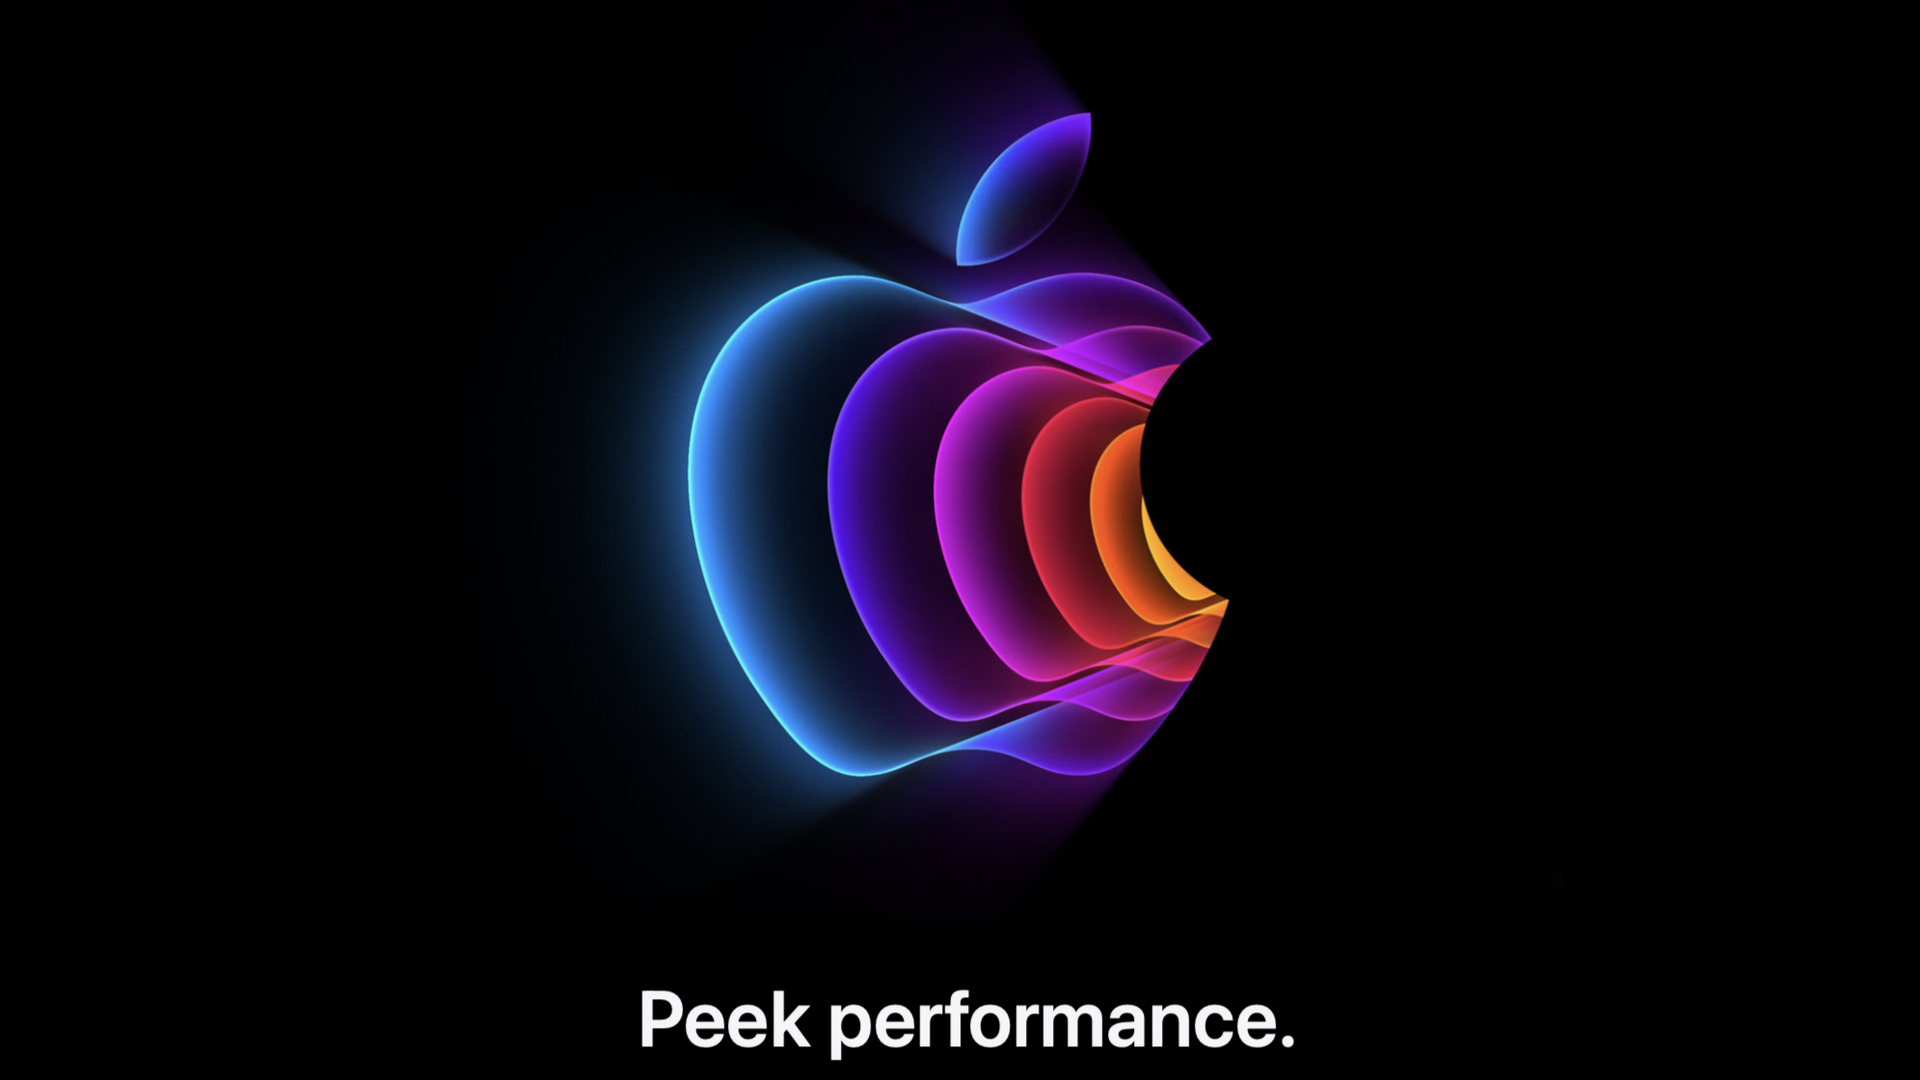 An image from Apple's invitation for Tuesday's press event.